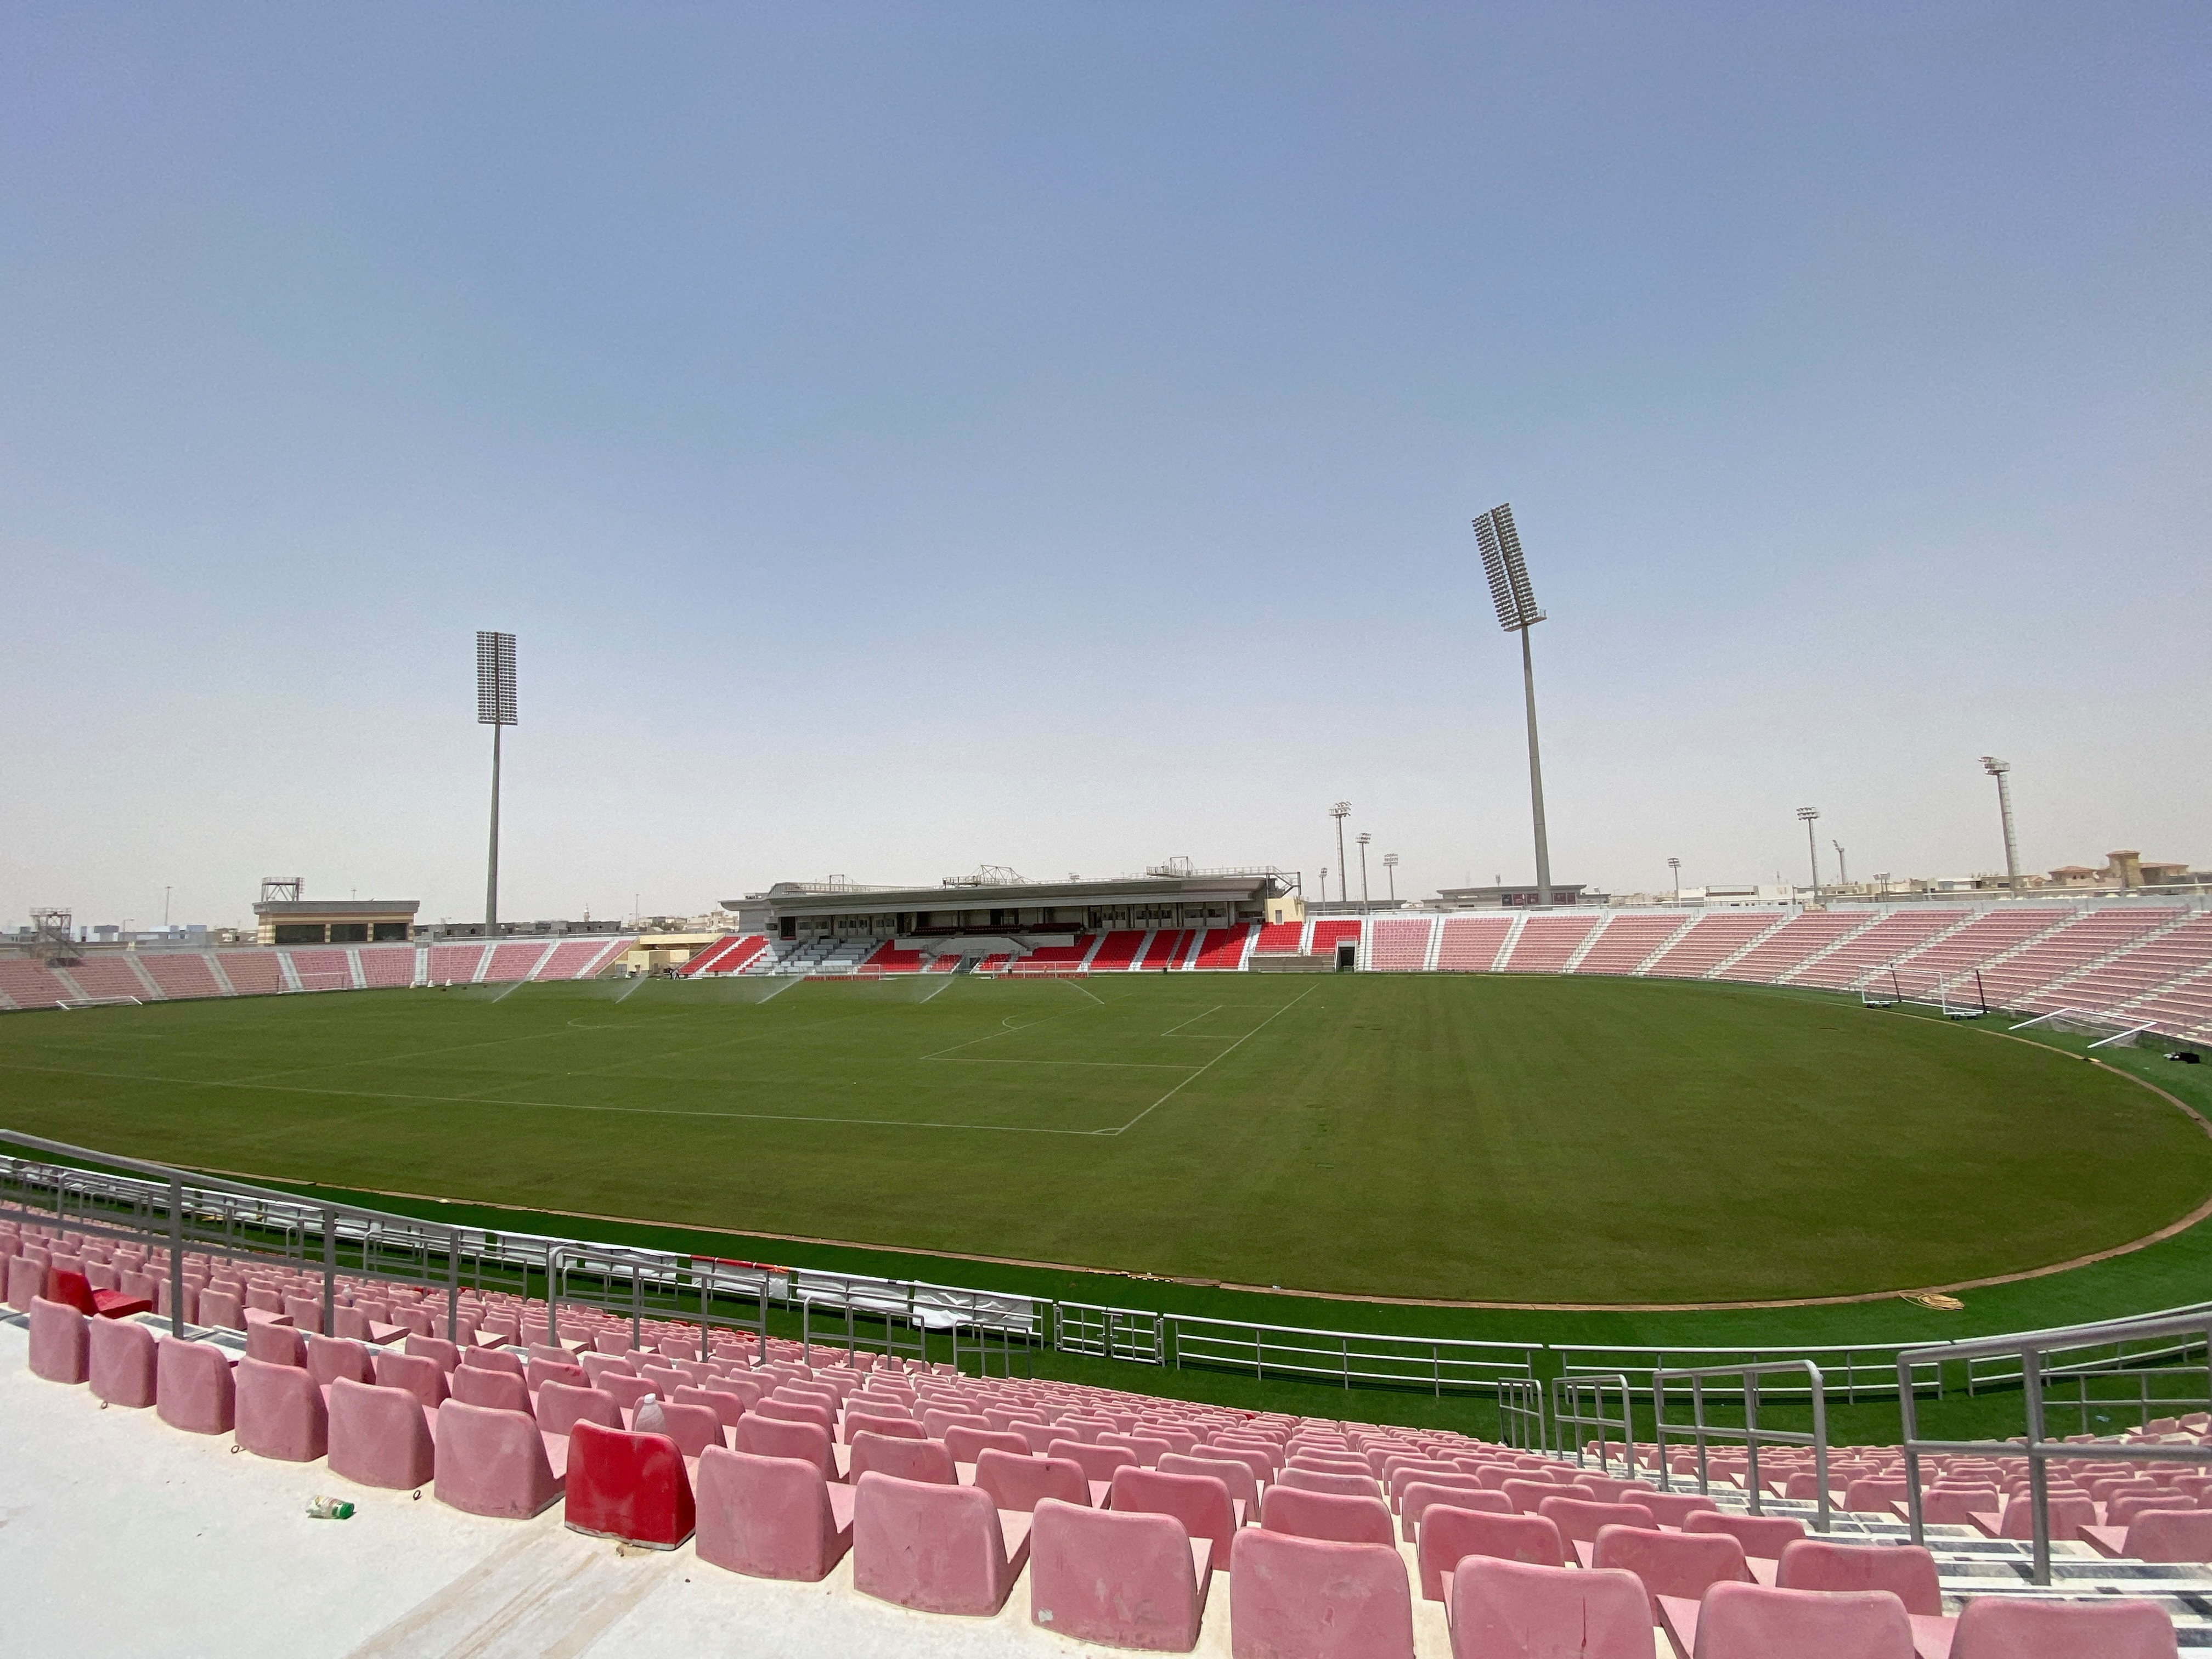 General view of Al Arabi Sports Complex Stadium which will be used for the FIFA World Cup Qatar 2022, Doha, Qatar